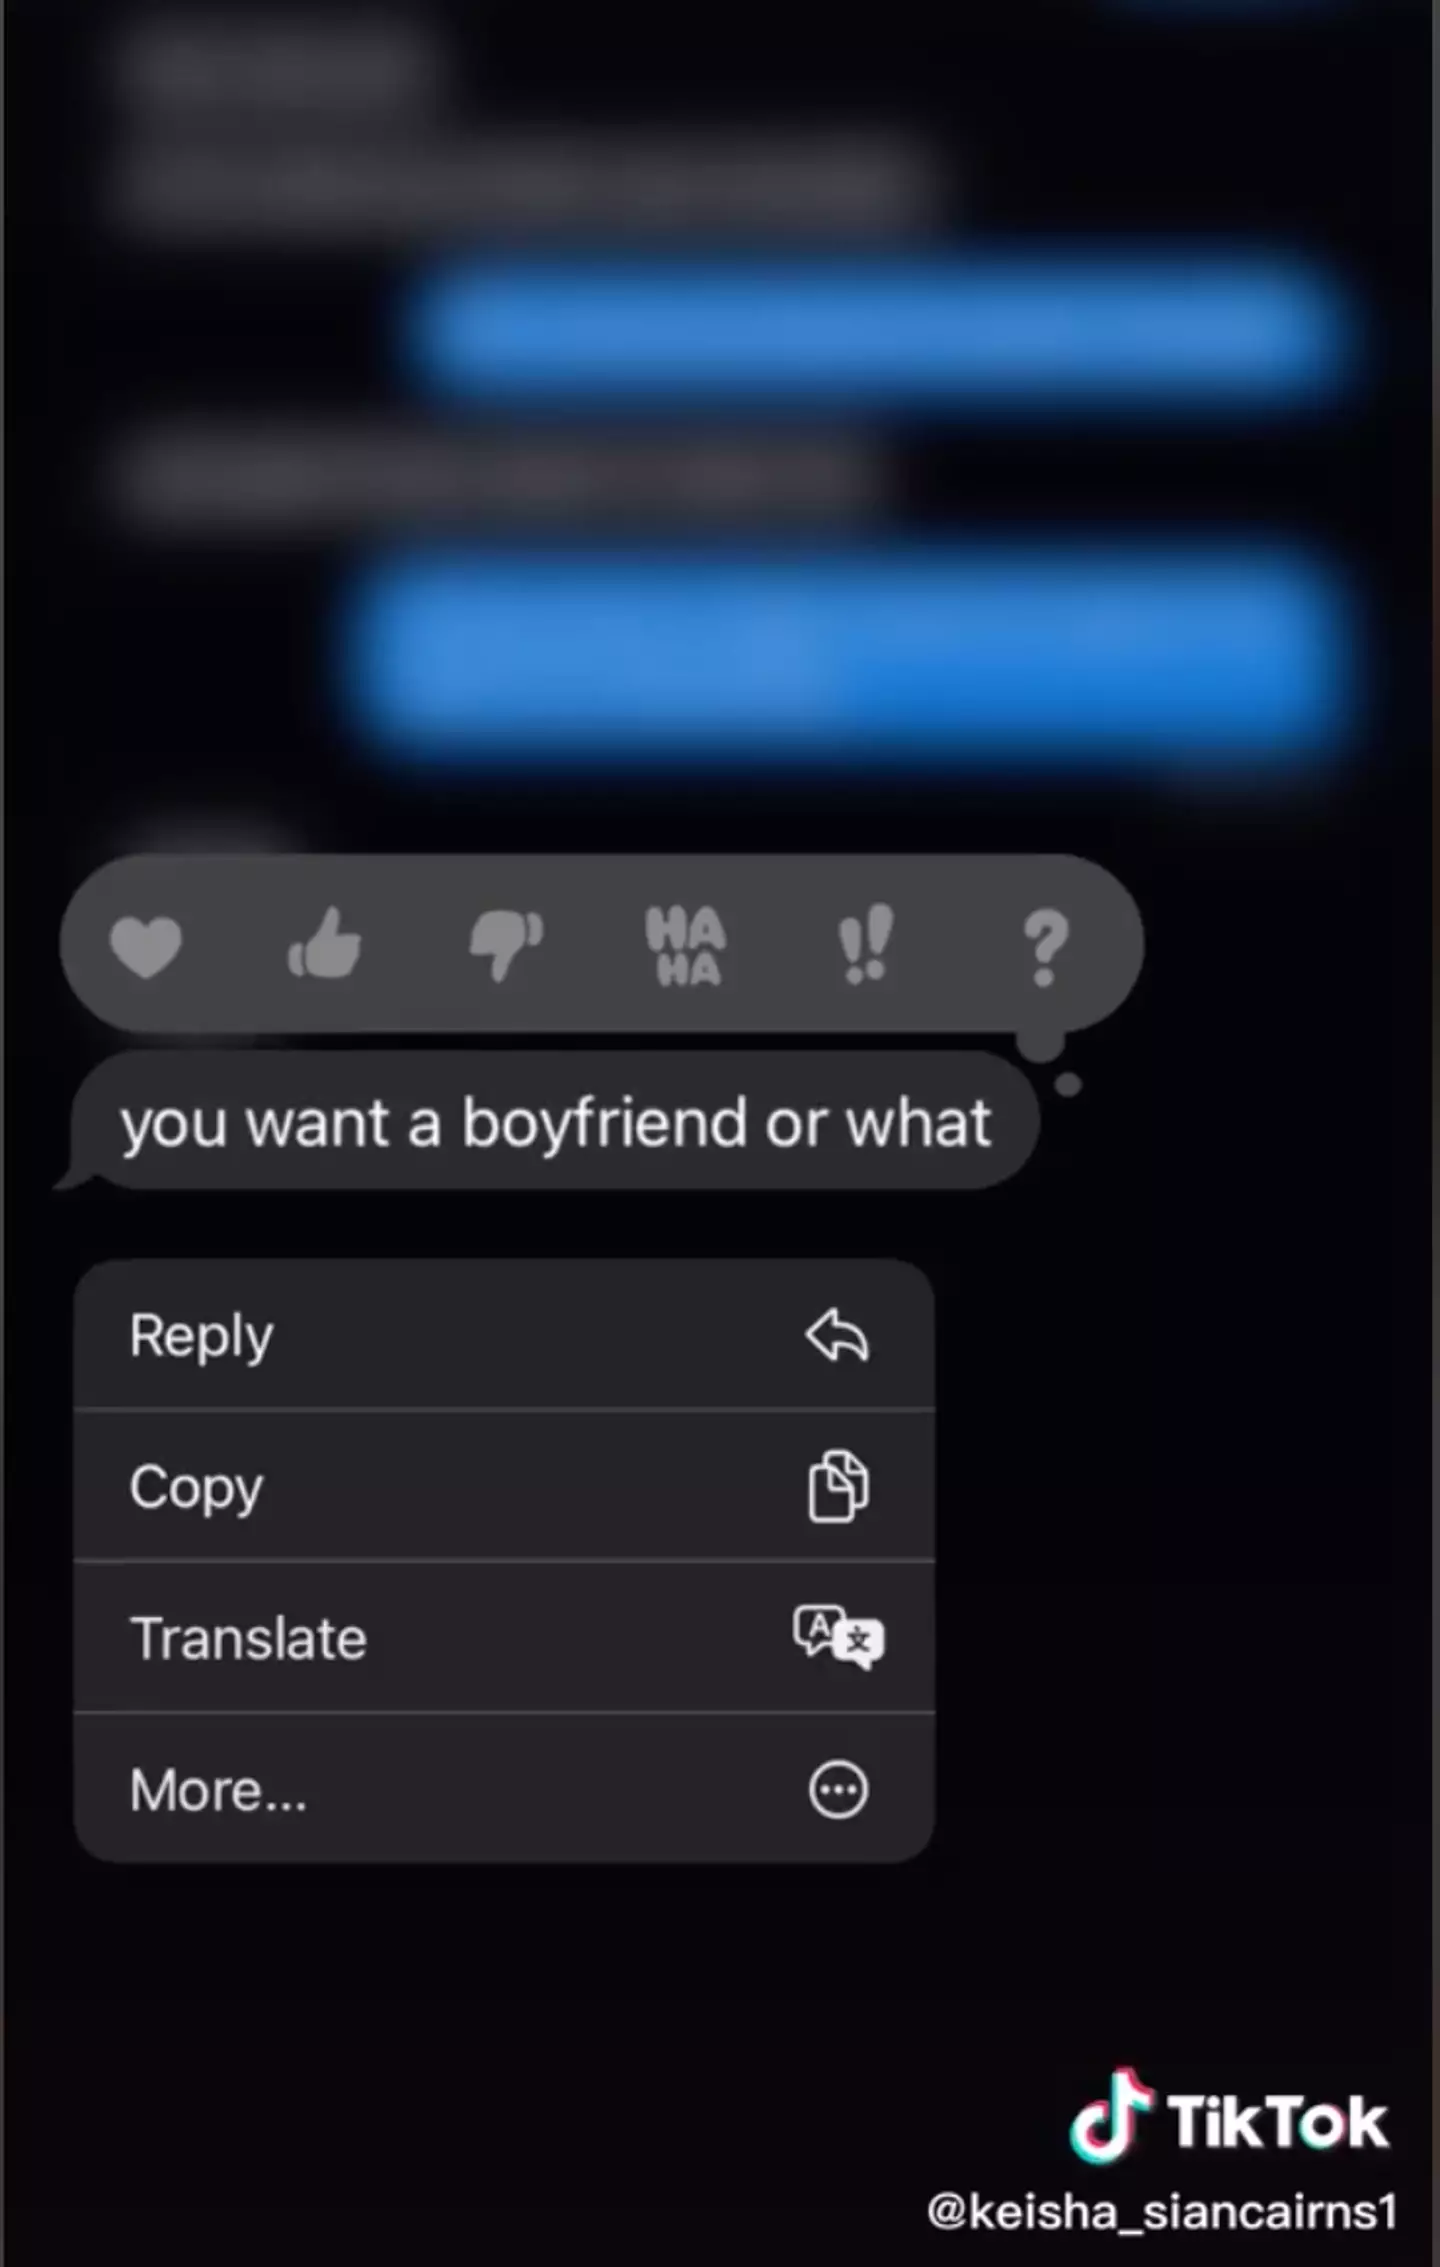 TikTok users were offended when the boyfriend asked this question (